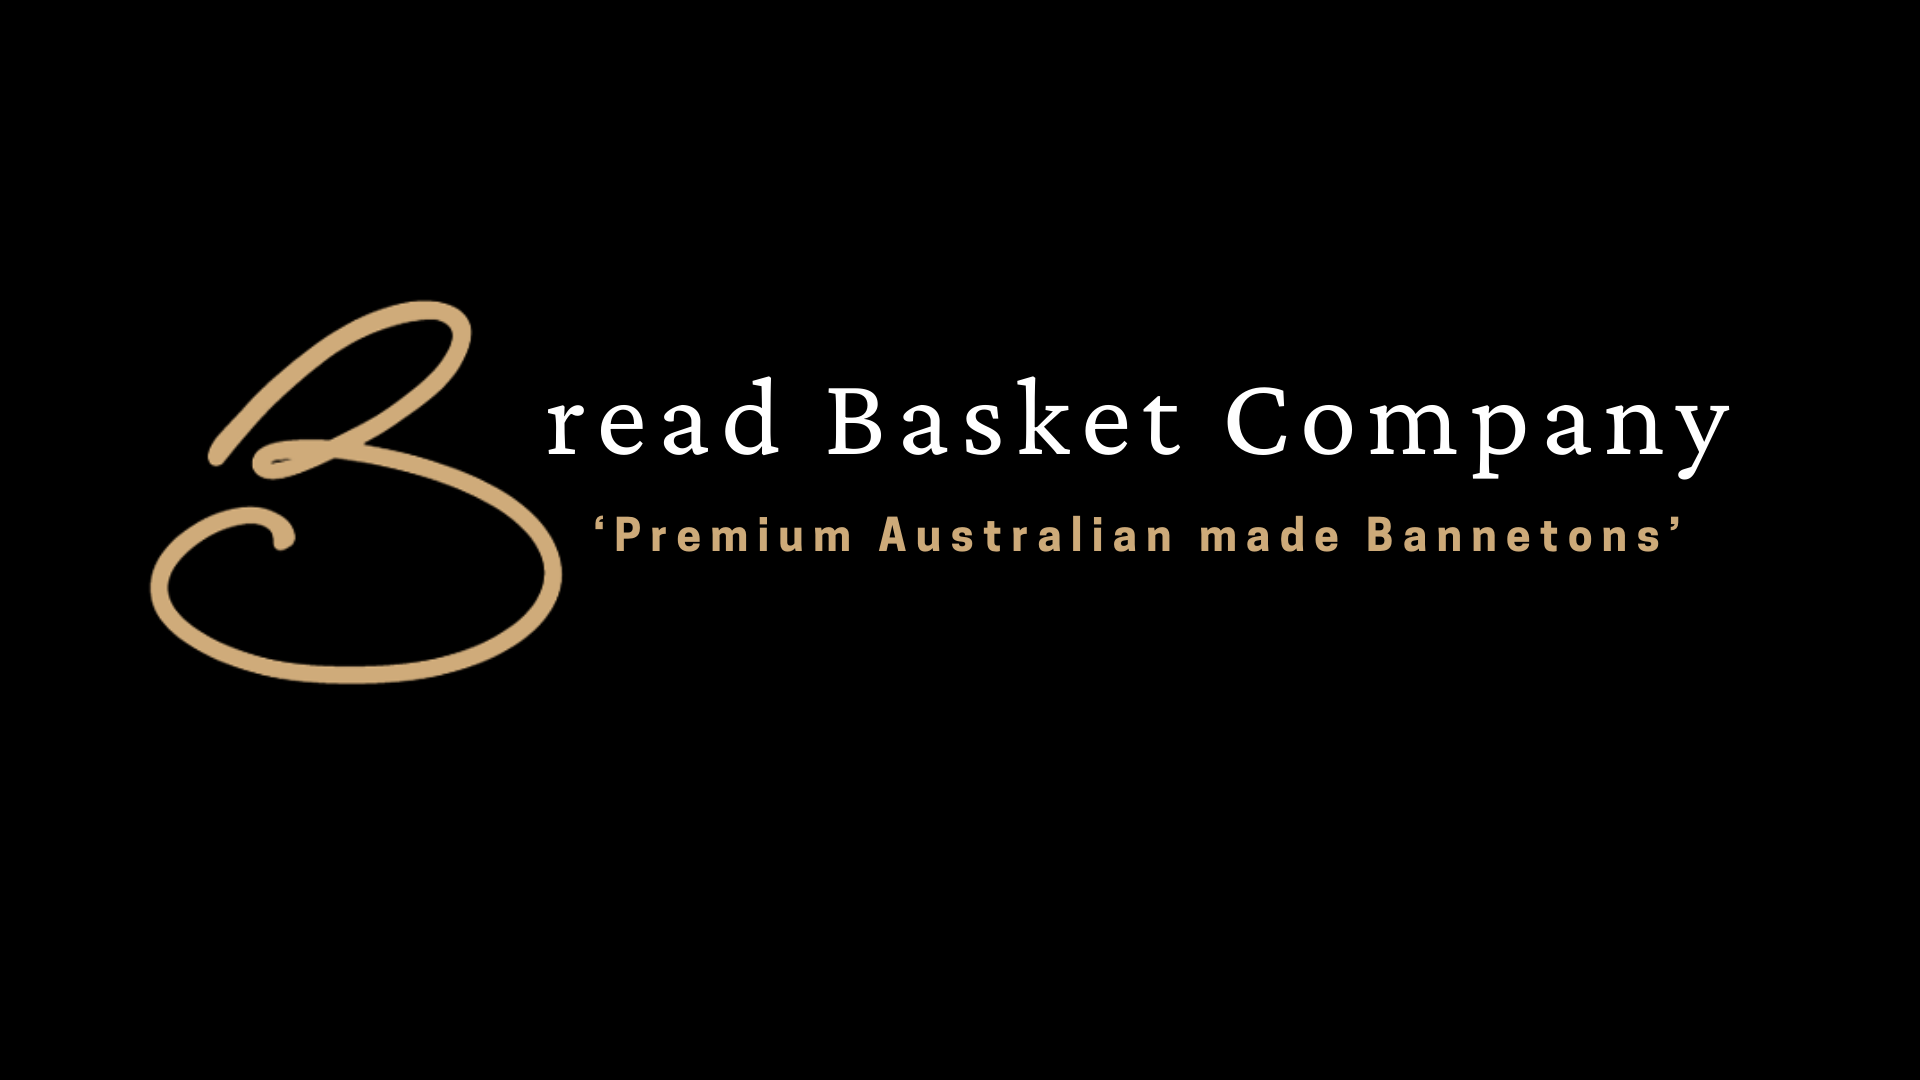 bread basket company large.PNG